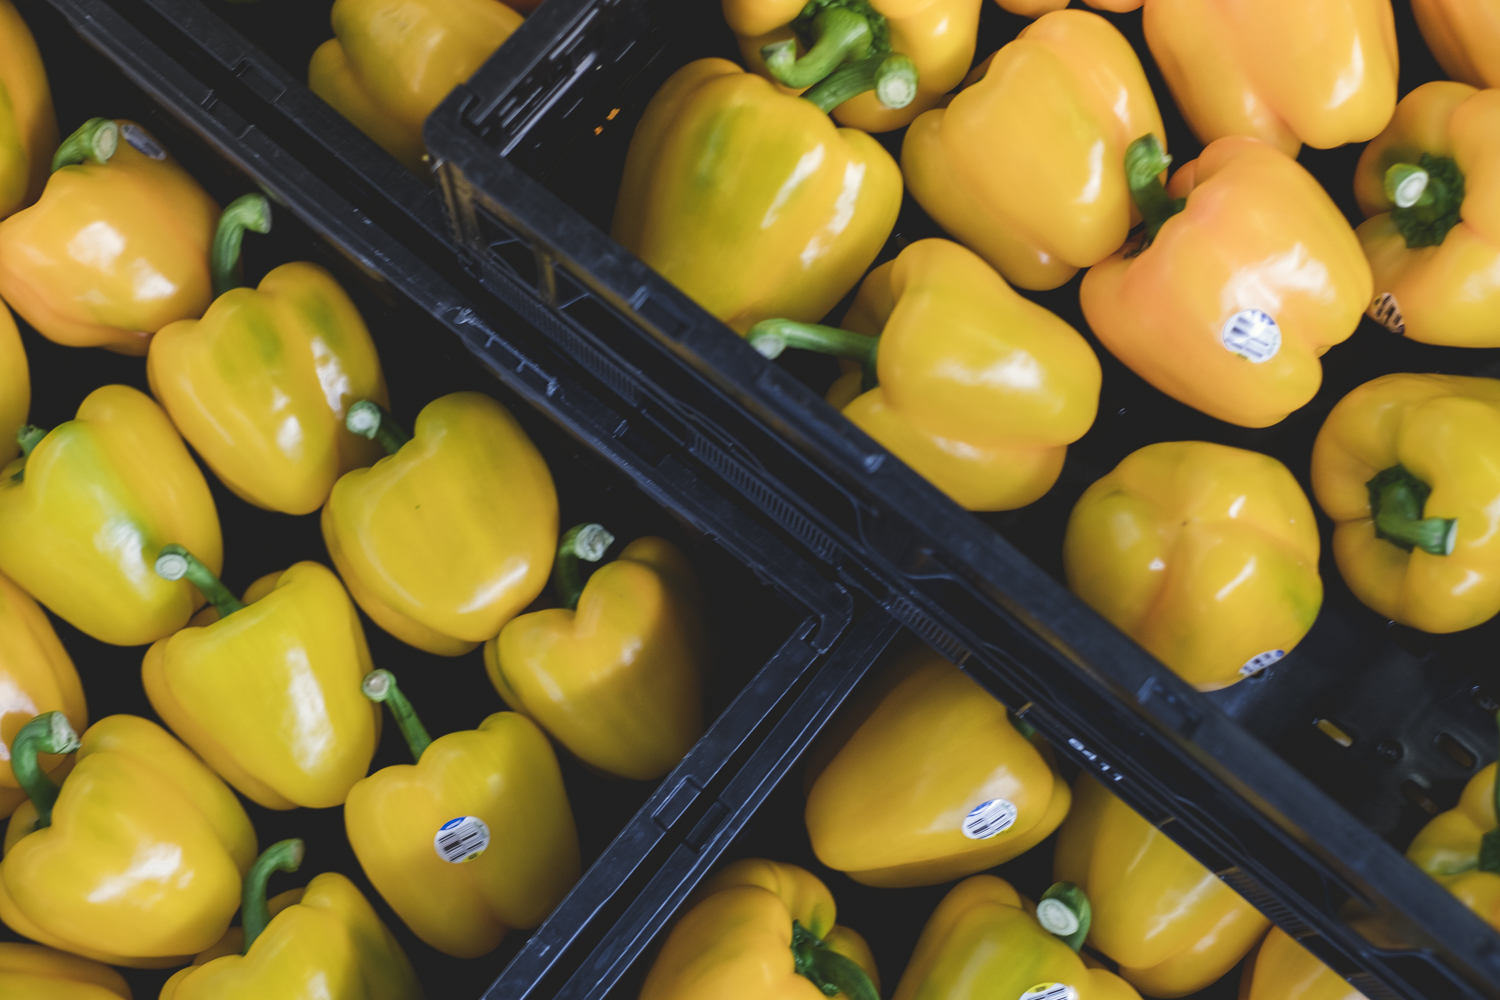 Top down view of Yellow Bell Peppers in storage crates